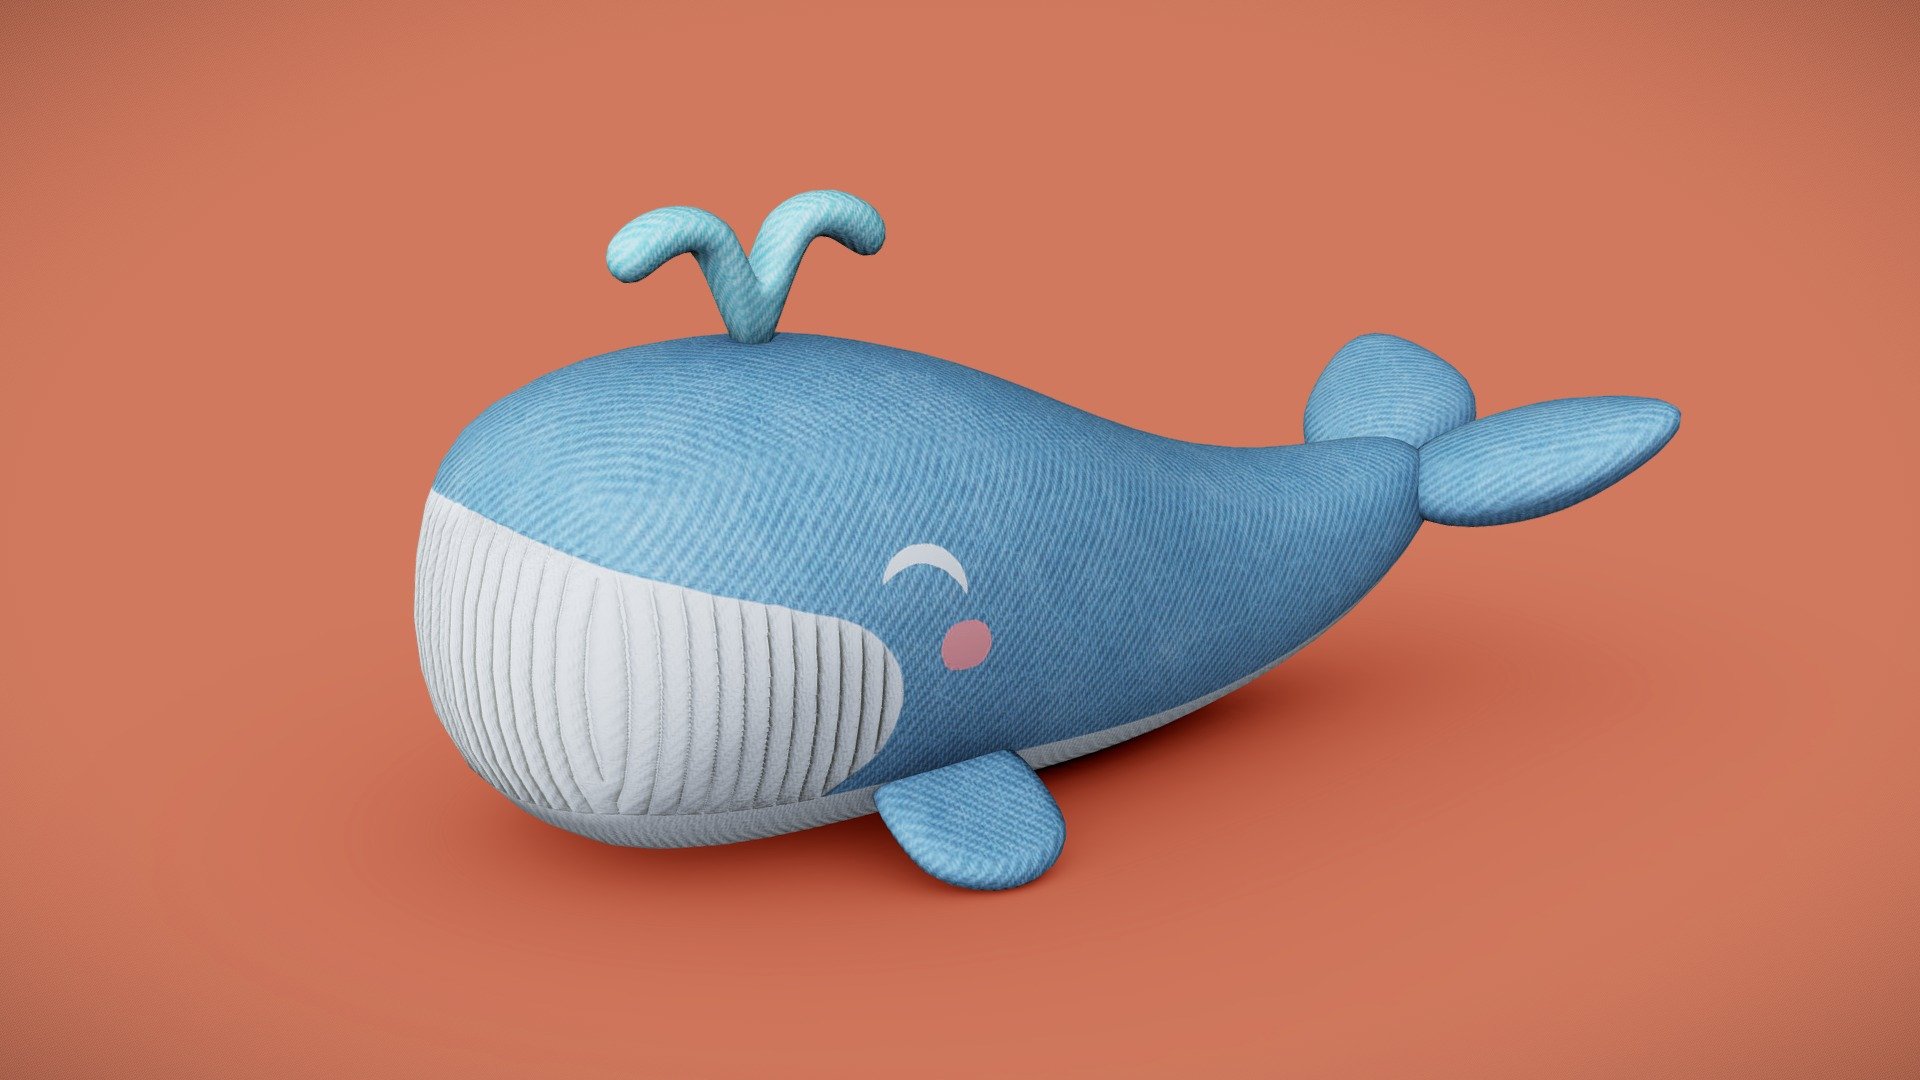 whale plush toy for your renders and games

Textures:

Diffuse color, Roughness, Normal, AO

All textures are 2K

Files Formats:

Blend

Fbx

Obj - whale plush toy - Buy Royalty Free 3D model by Vanessa Araújo (@vanessa3d) 3d model